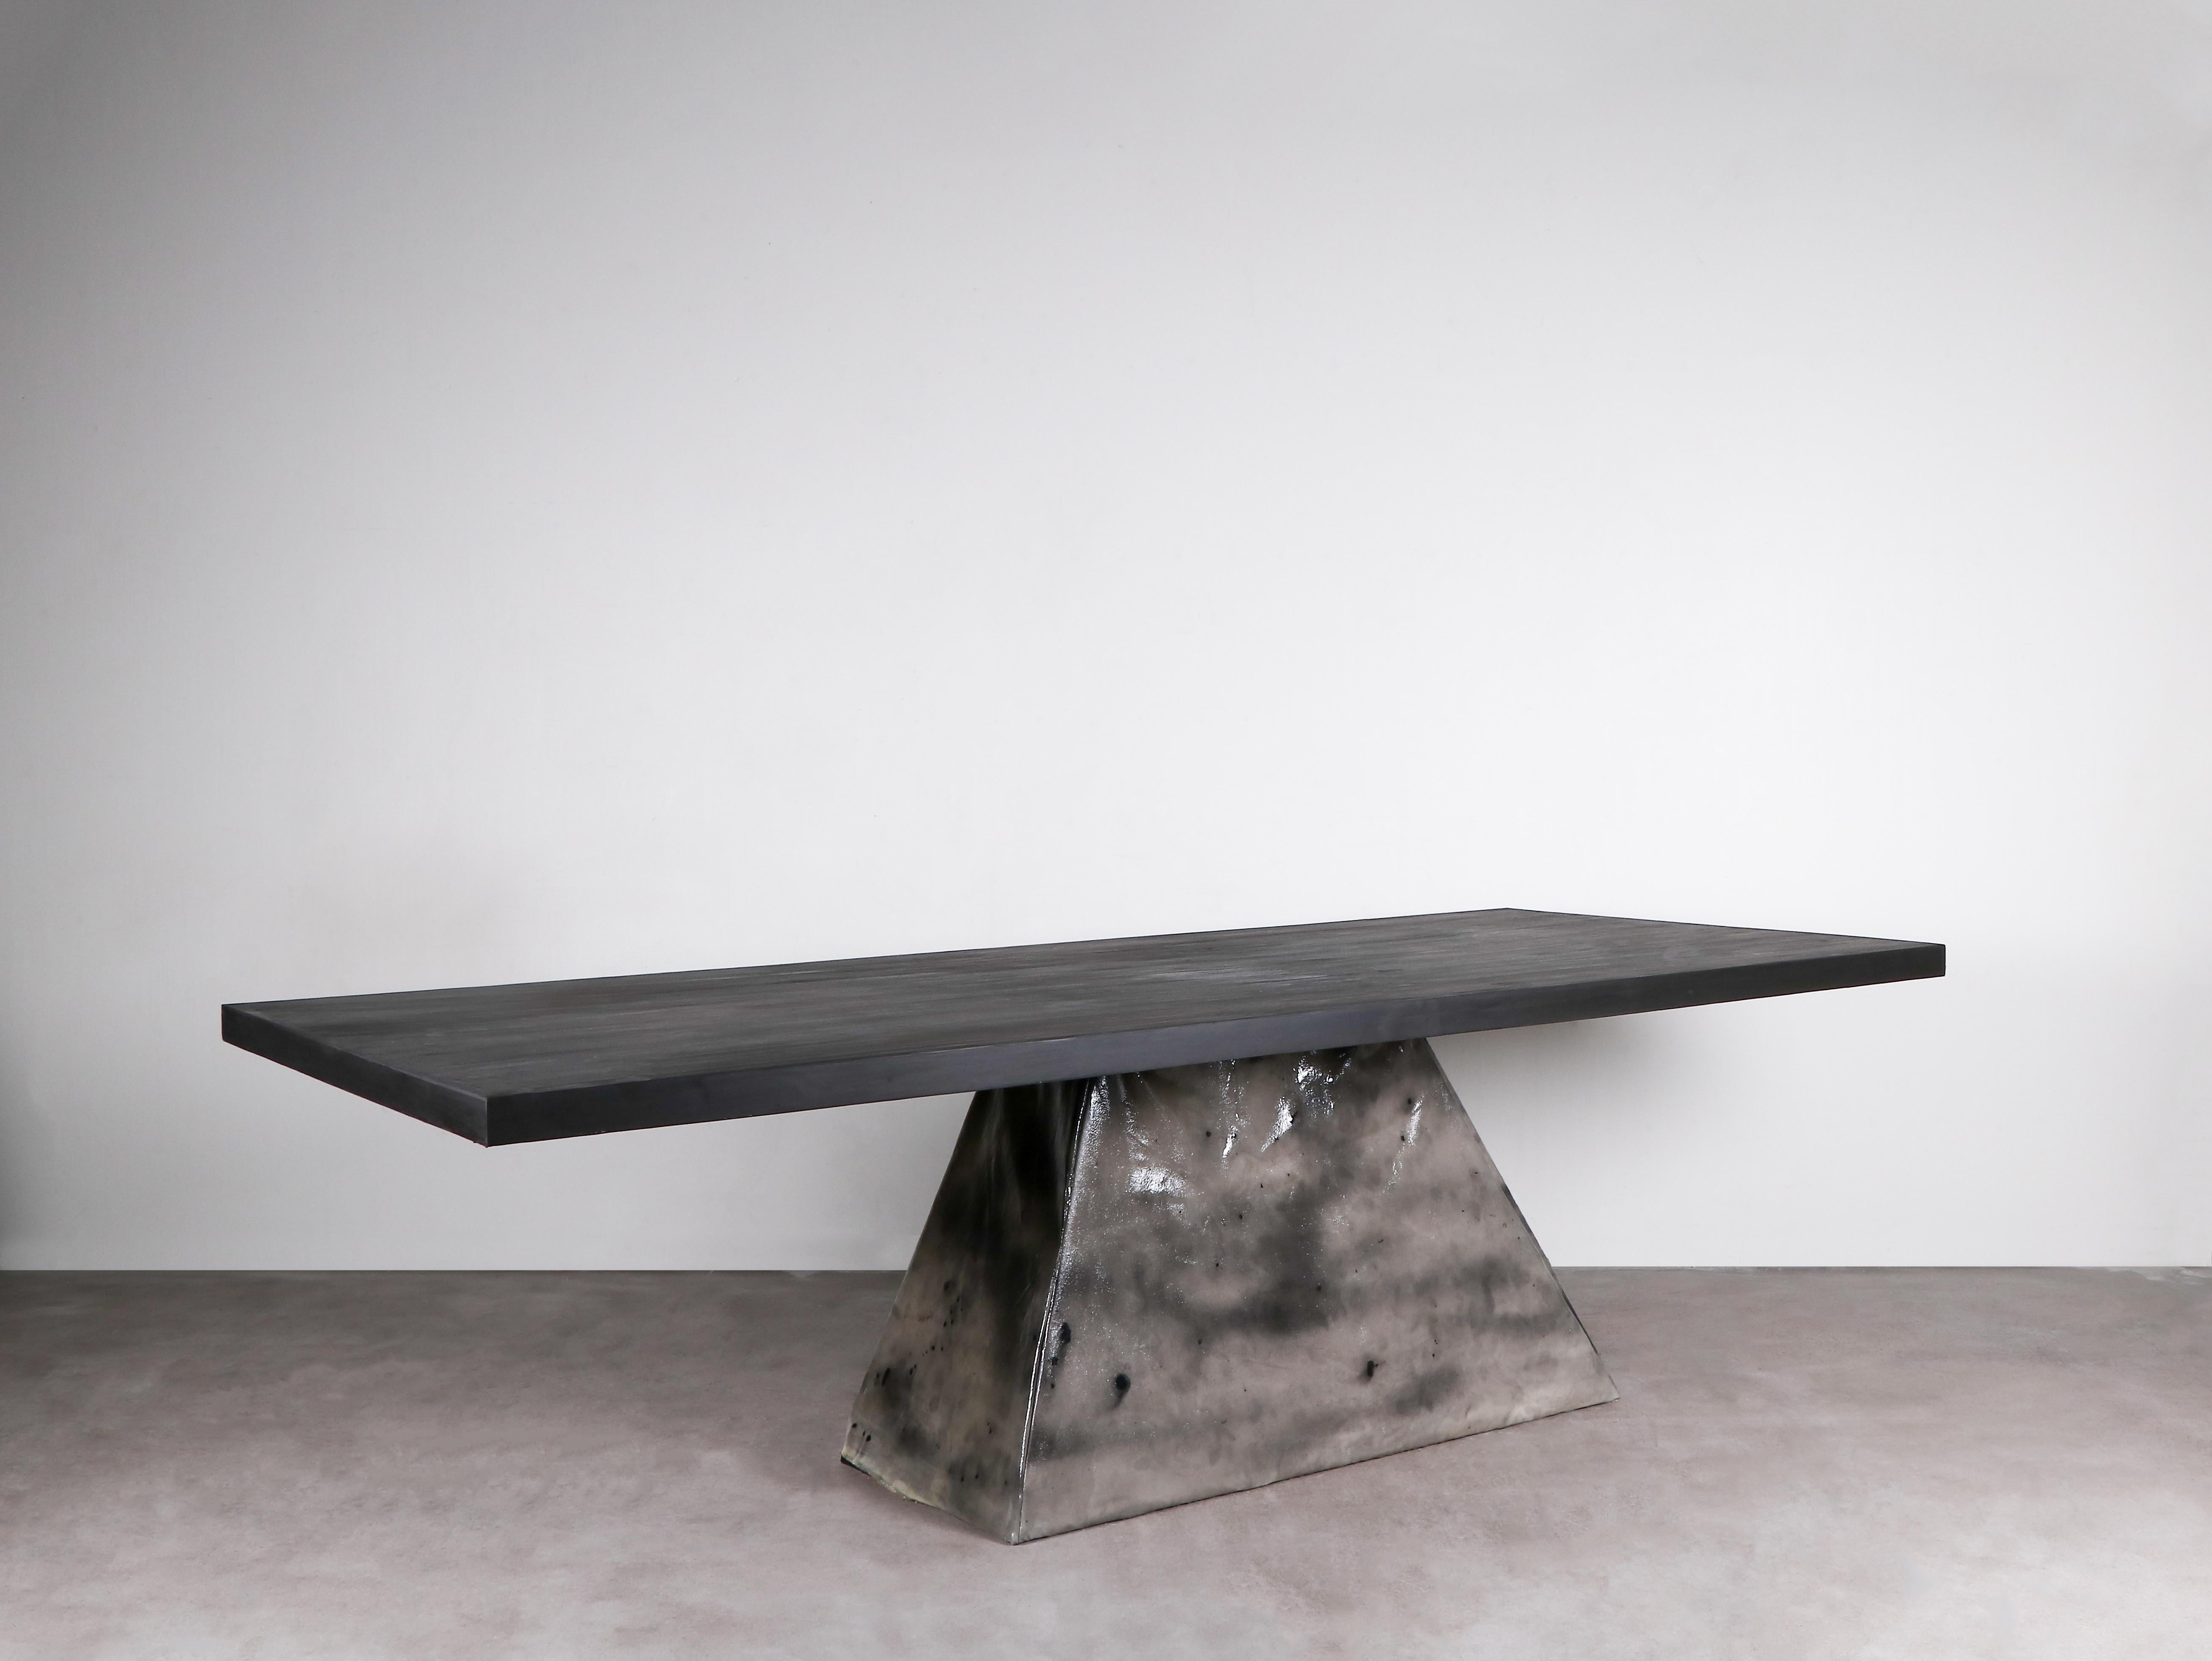 Duk table by Lucas Morten
Limited edition of 11 + 1 AP
Signed
Dimensions: D 100 x W 240 x H 72 cm
Material: reinforced canvas on plywood and hand-waxed plywood

Objects comes with a 